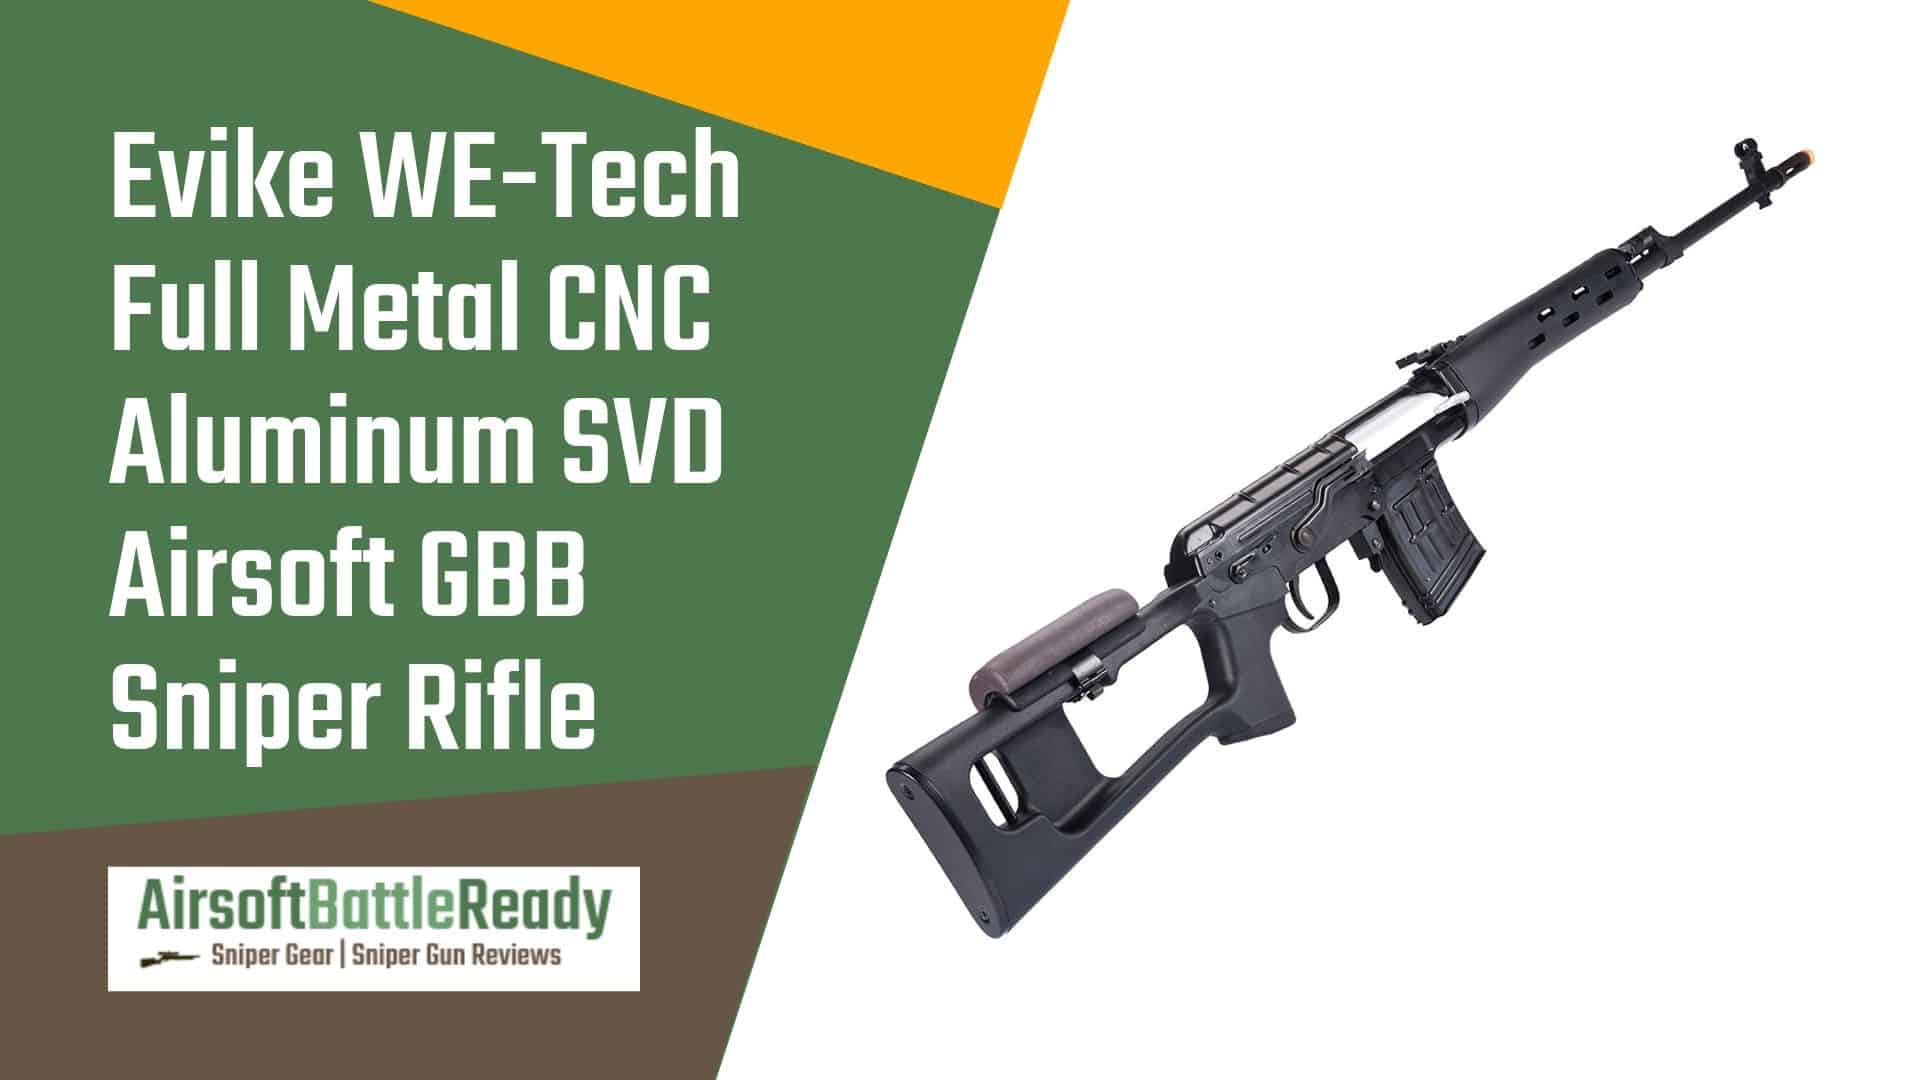 Evike WE-Tech Full Metal CNC Aluminum SVD Airsoft Gas Blowback Sniper Rifle Review - Airsoft Battle Ready